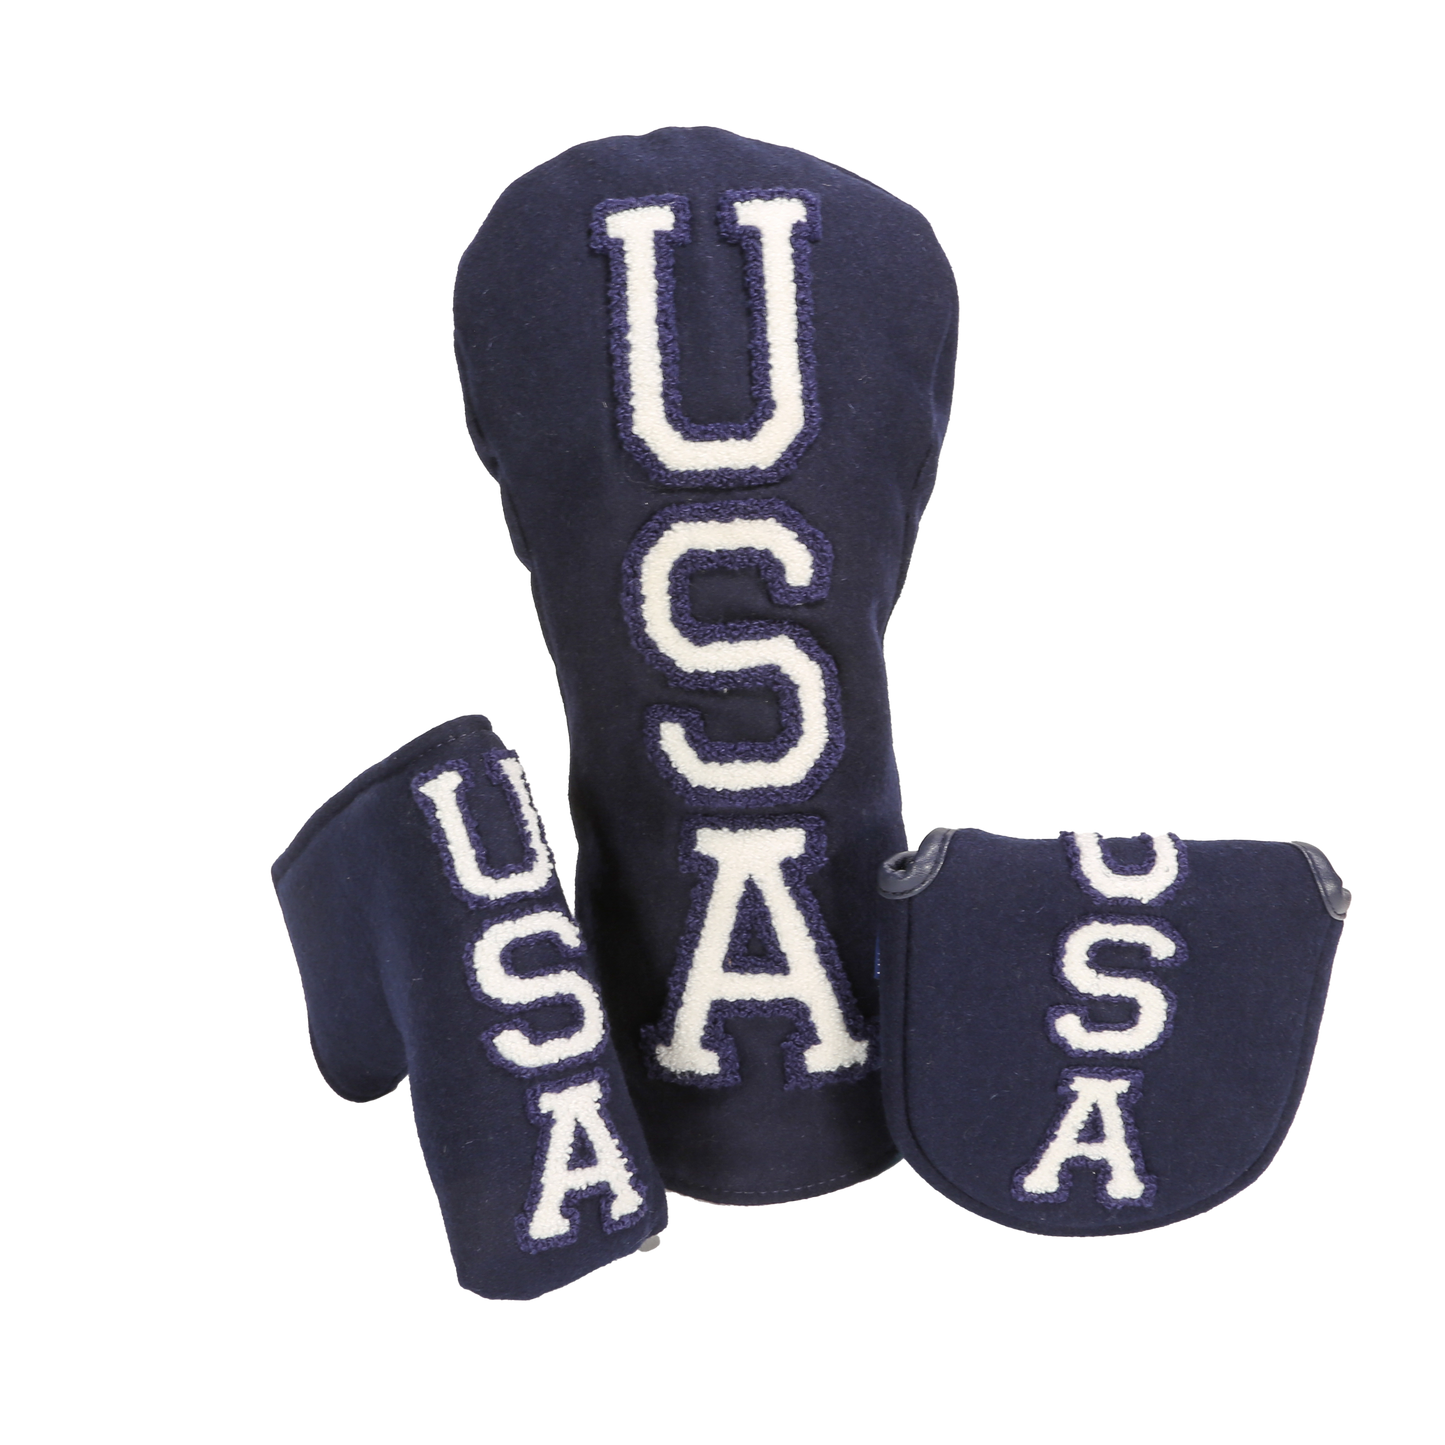 USA "Wool" Blade Putter Cover